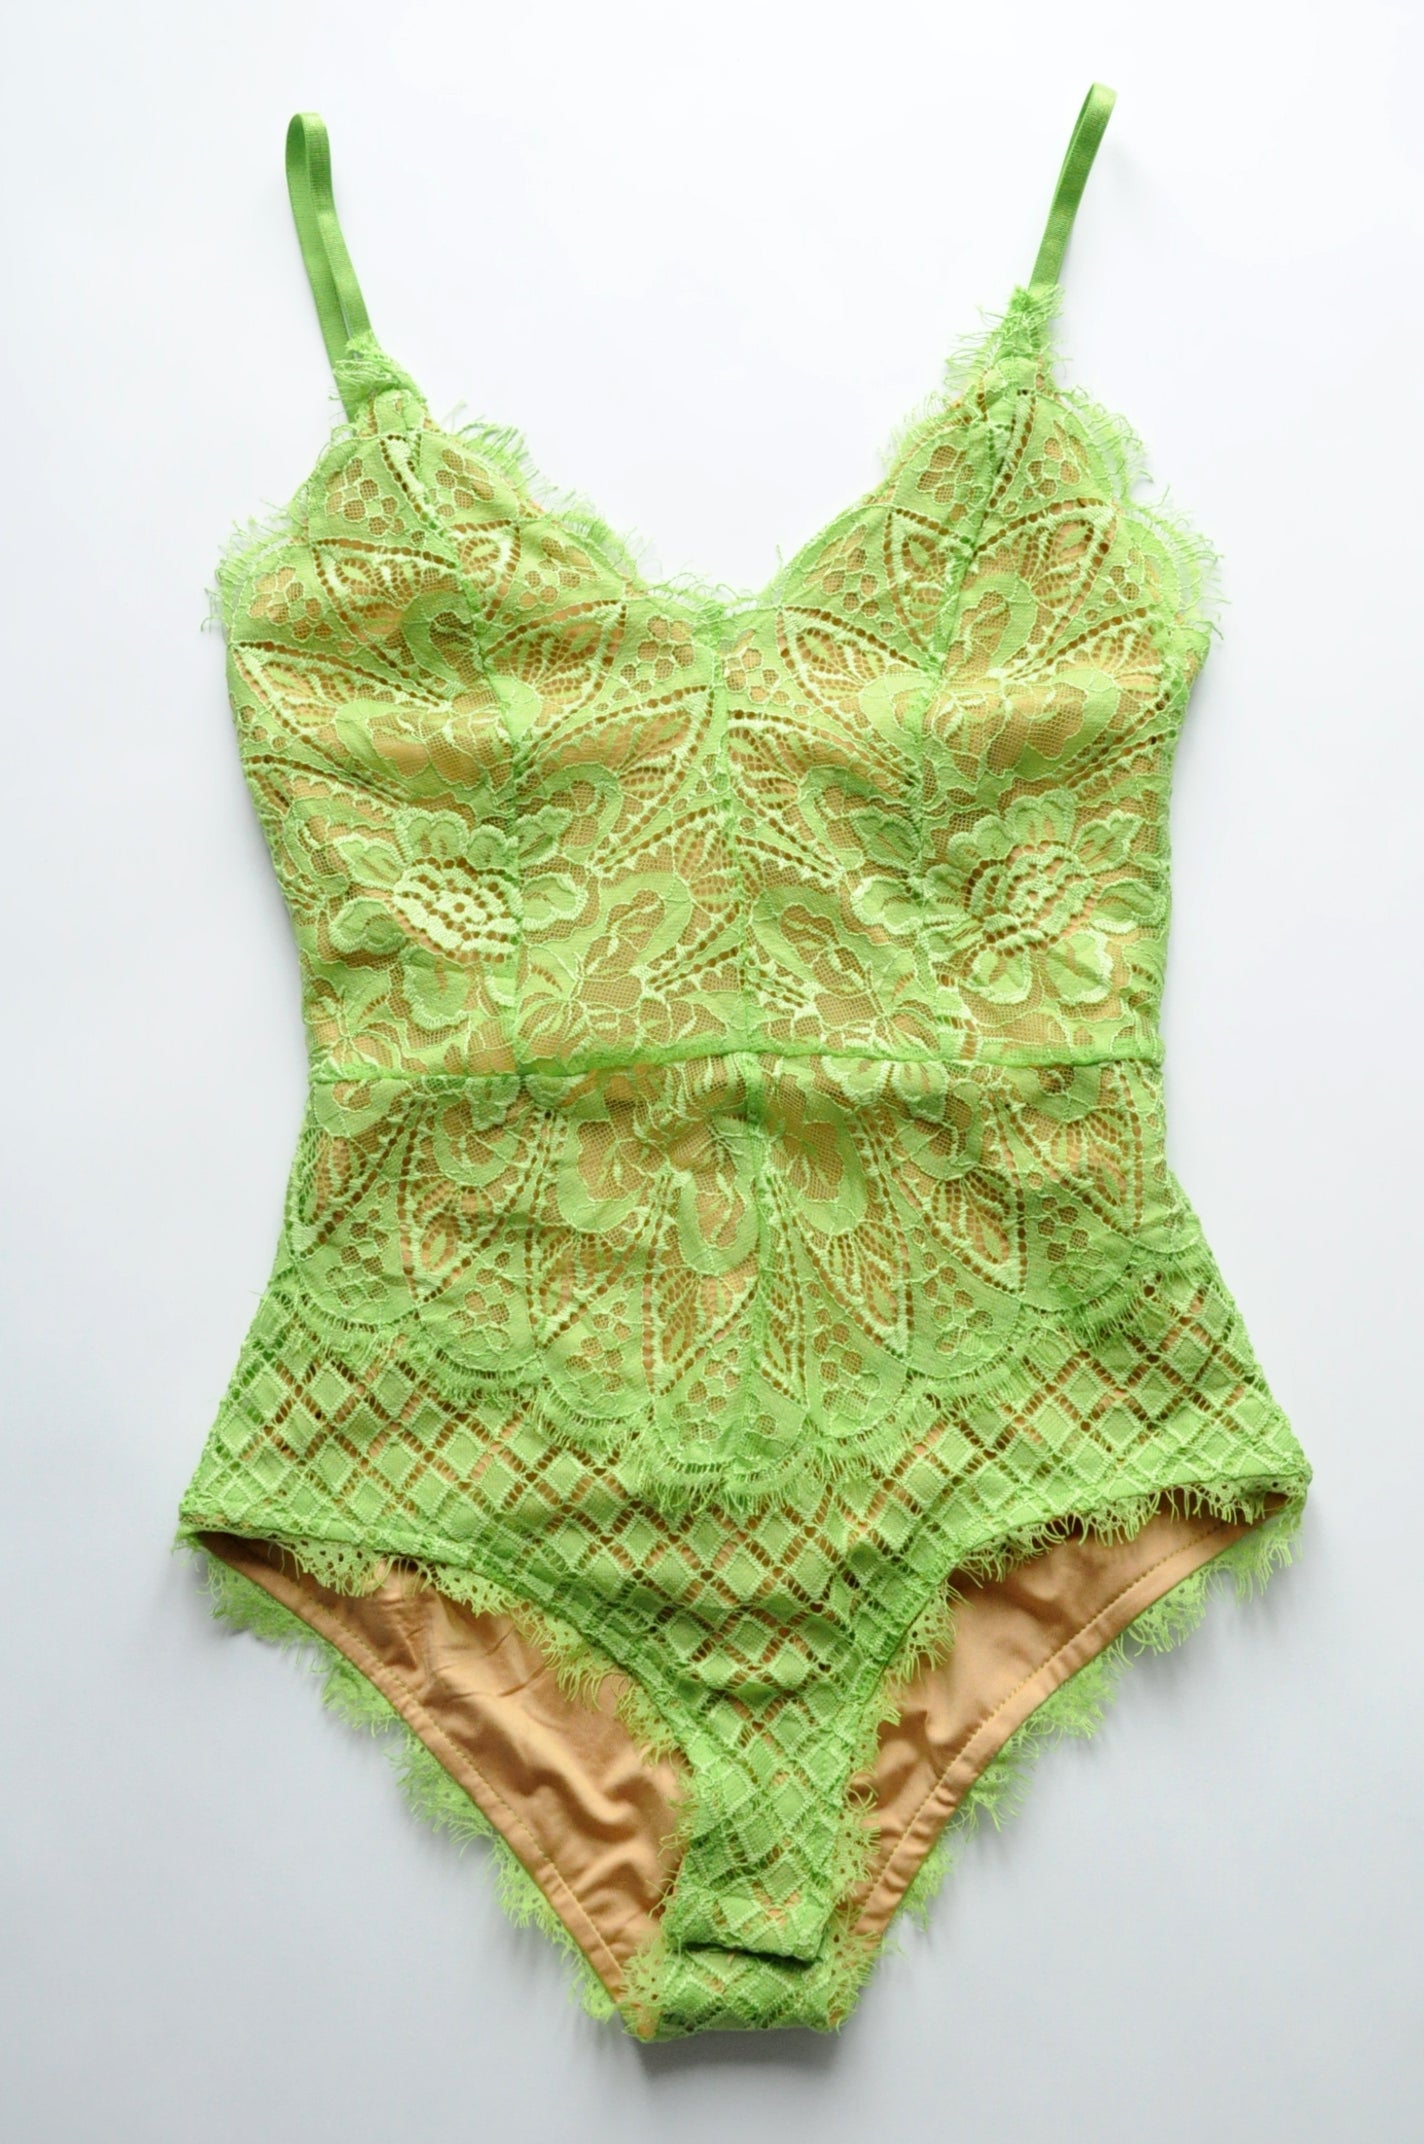 LIME GREEN BODYSUIT From Primark - Size S (Uk 10 - 12) £1.20 - PicClick UK